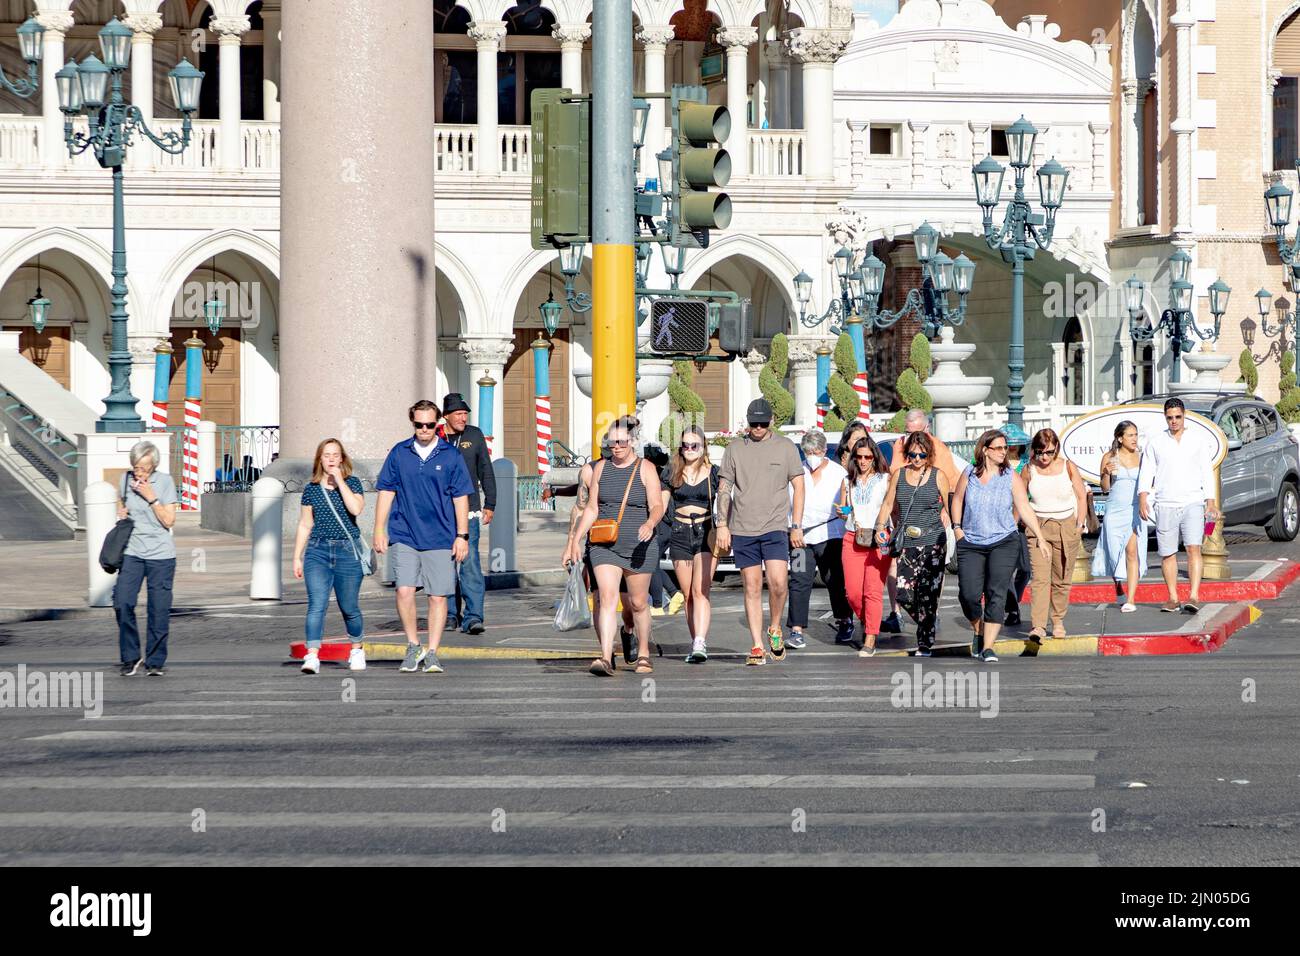 Las Vegas, USA - May 24, 2022: tourists in Las Vegas crossing the street in daytime at a pedestriam crossing. Stock Photo